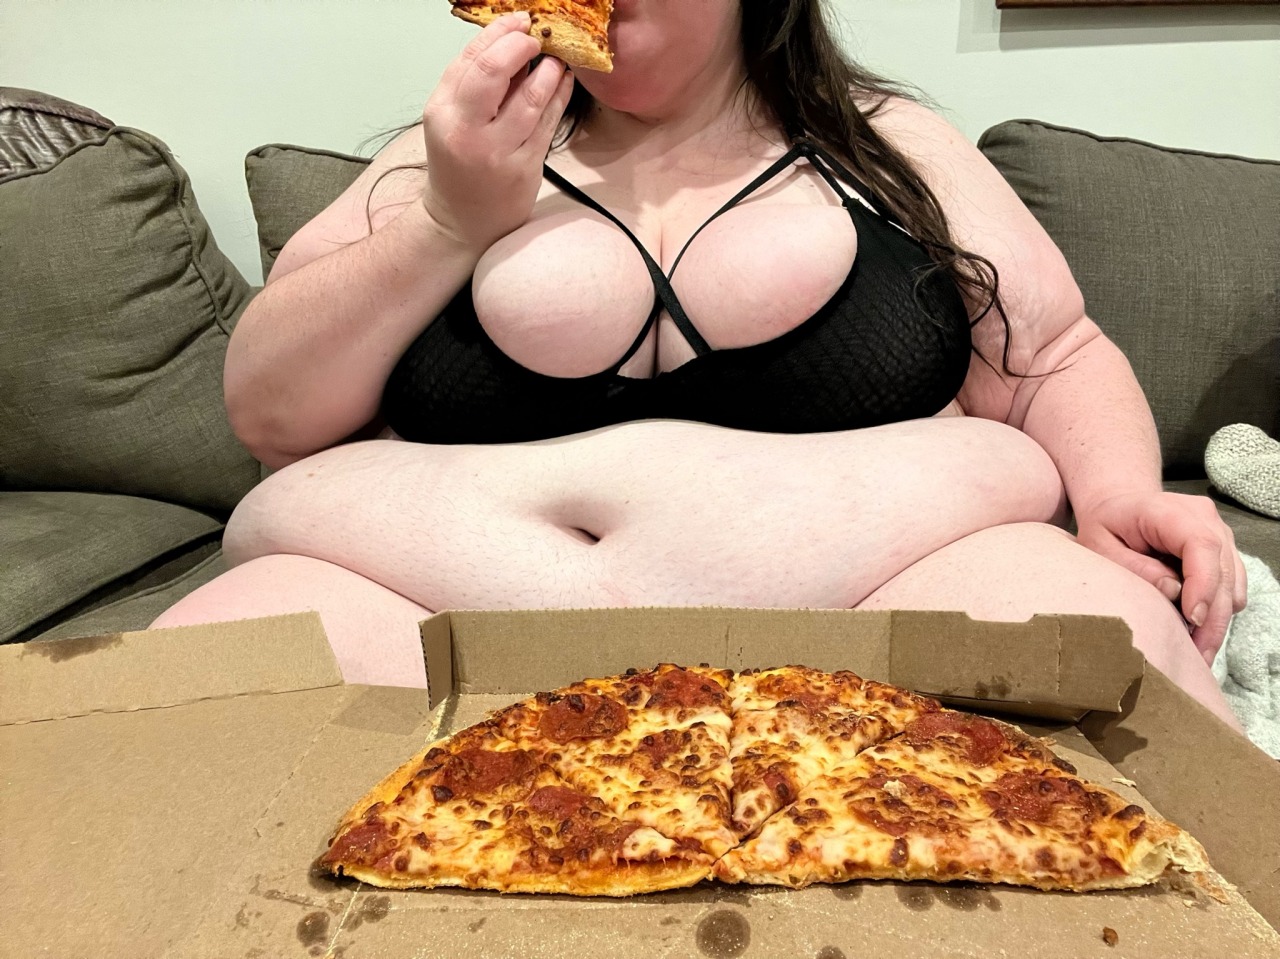 wontstopeating-deactivated20220:Pizza pig adult photos